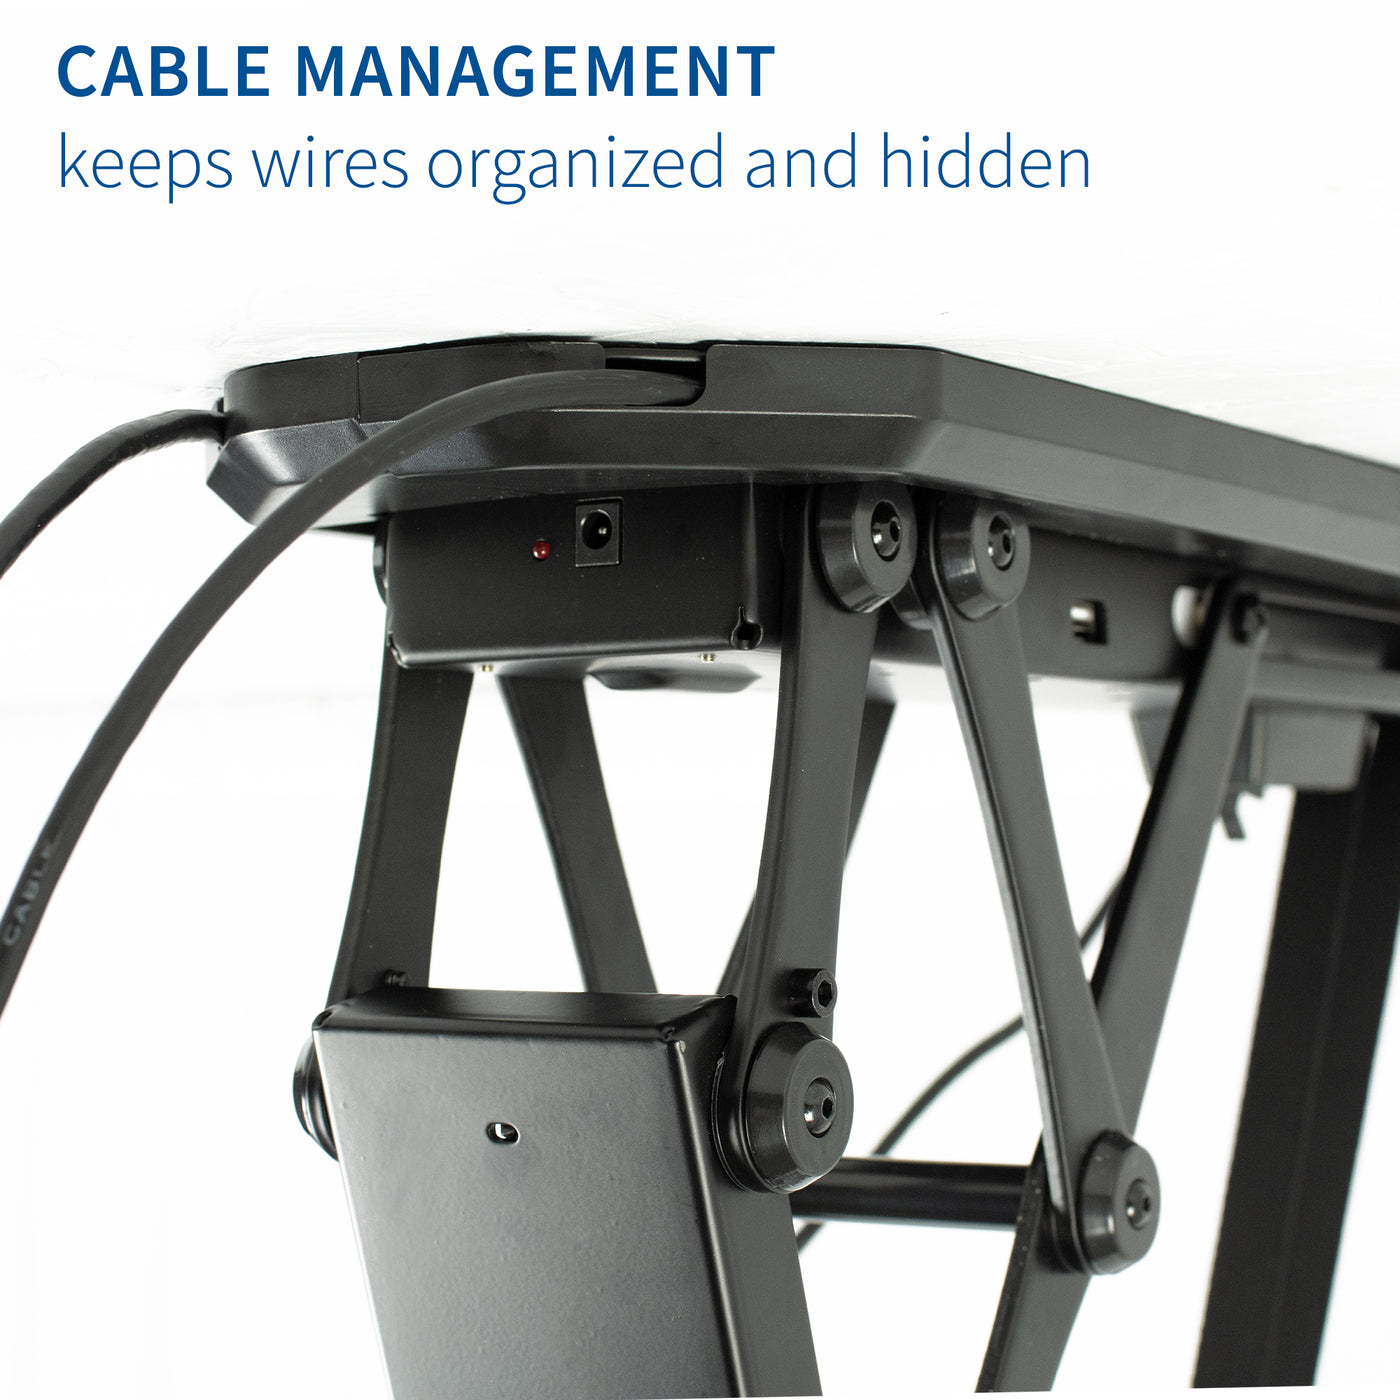 Sleek design with organized and hidden cable management running through back of mount.